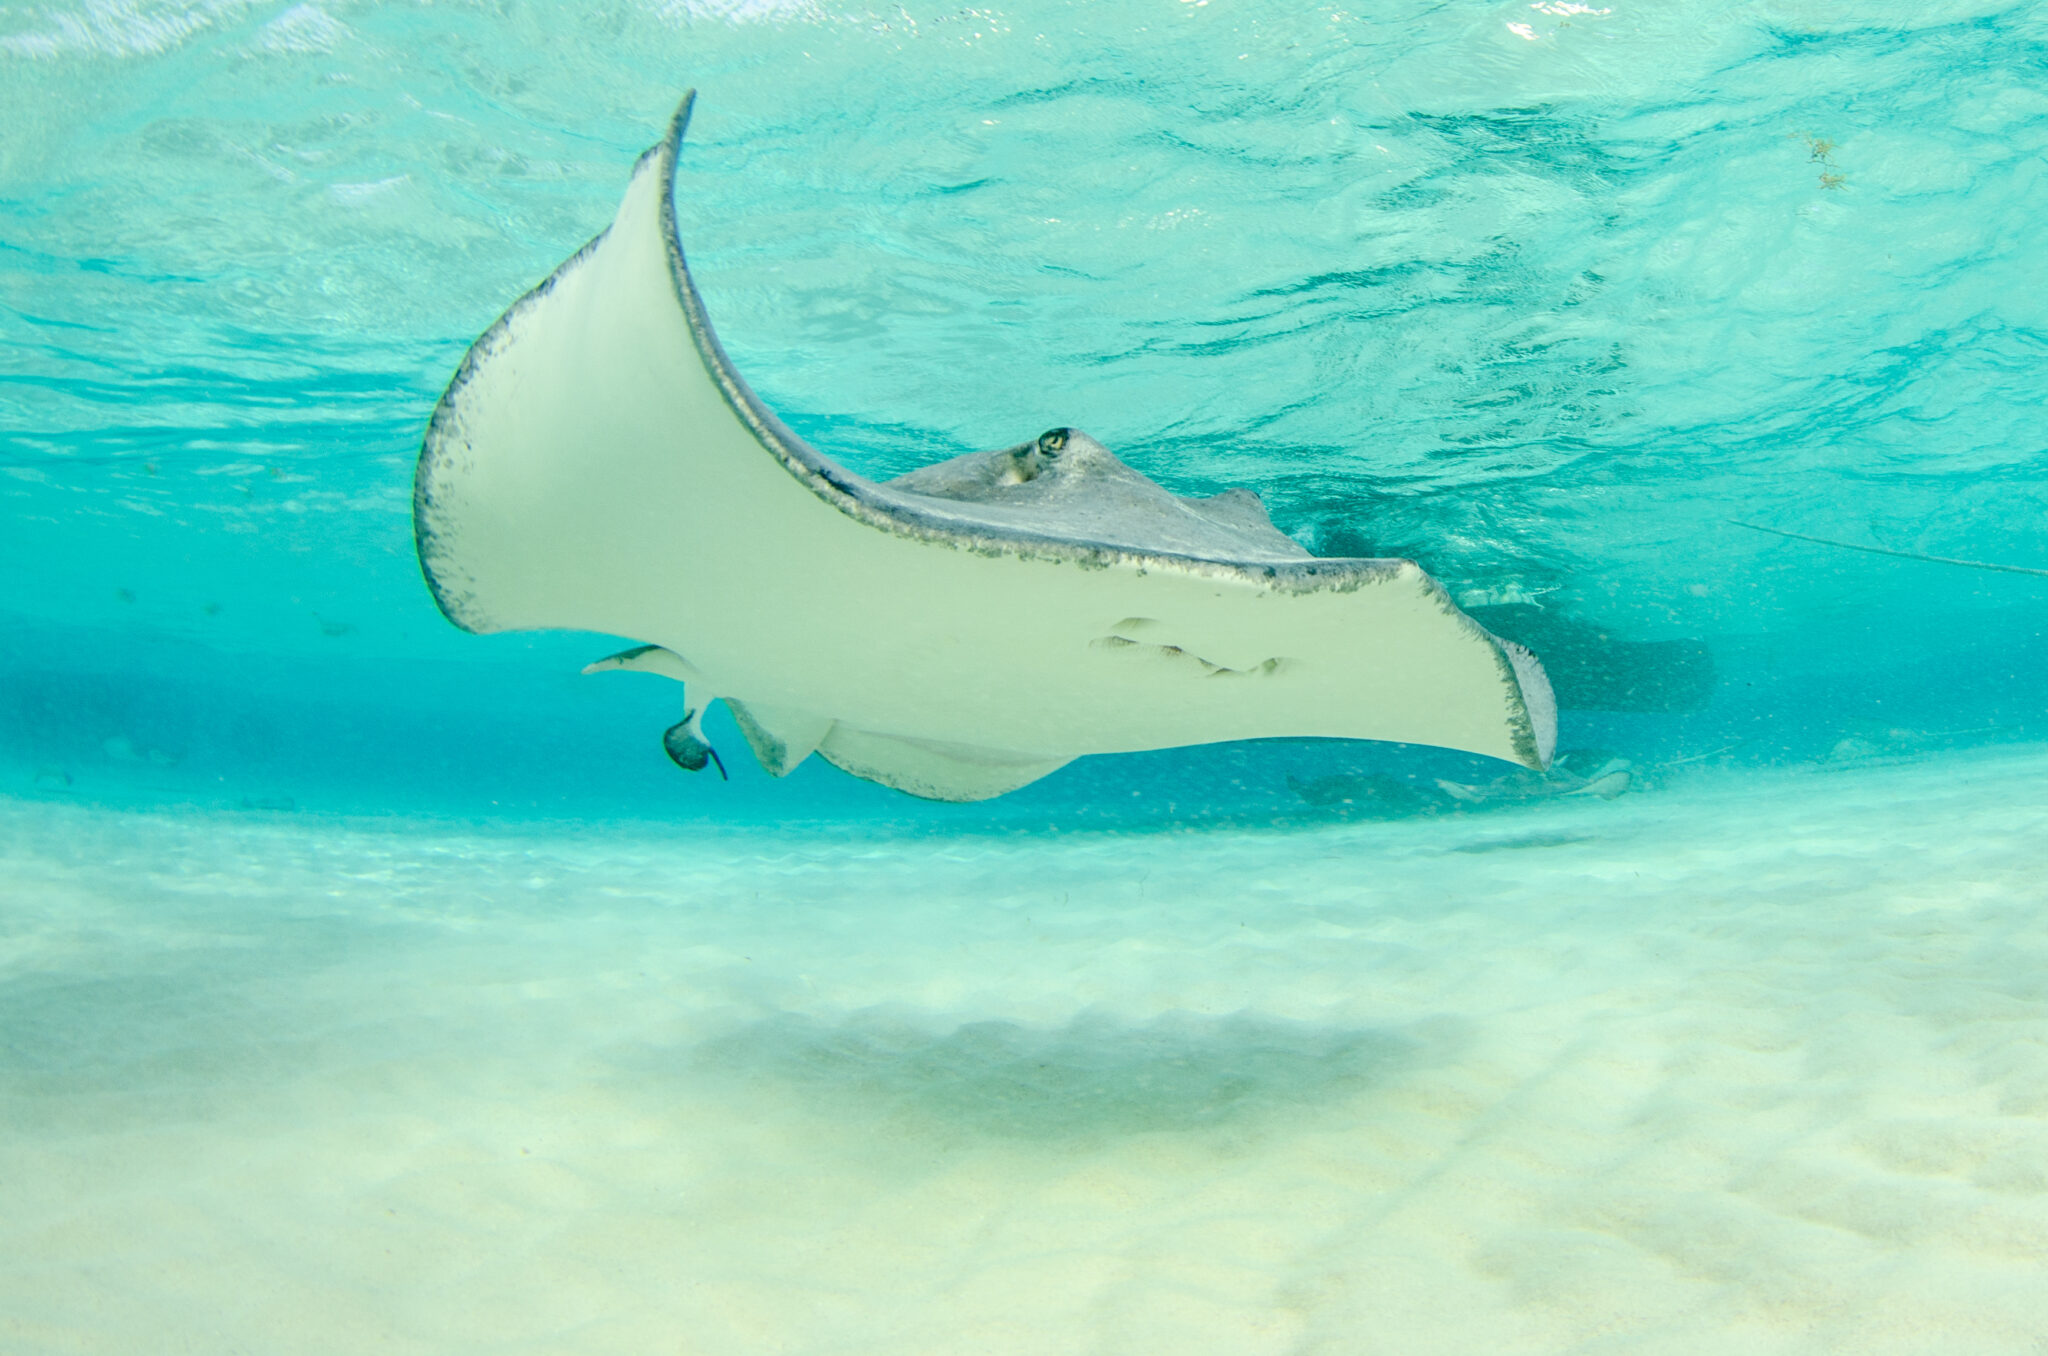 docile stingray glides through water